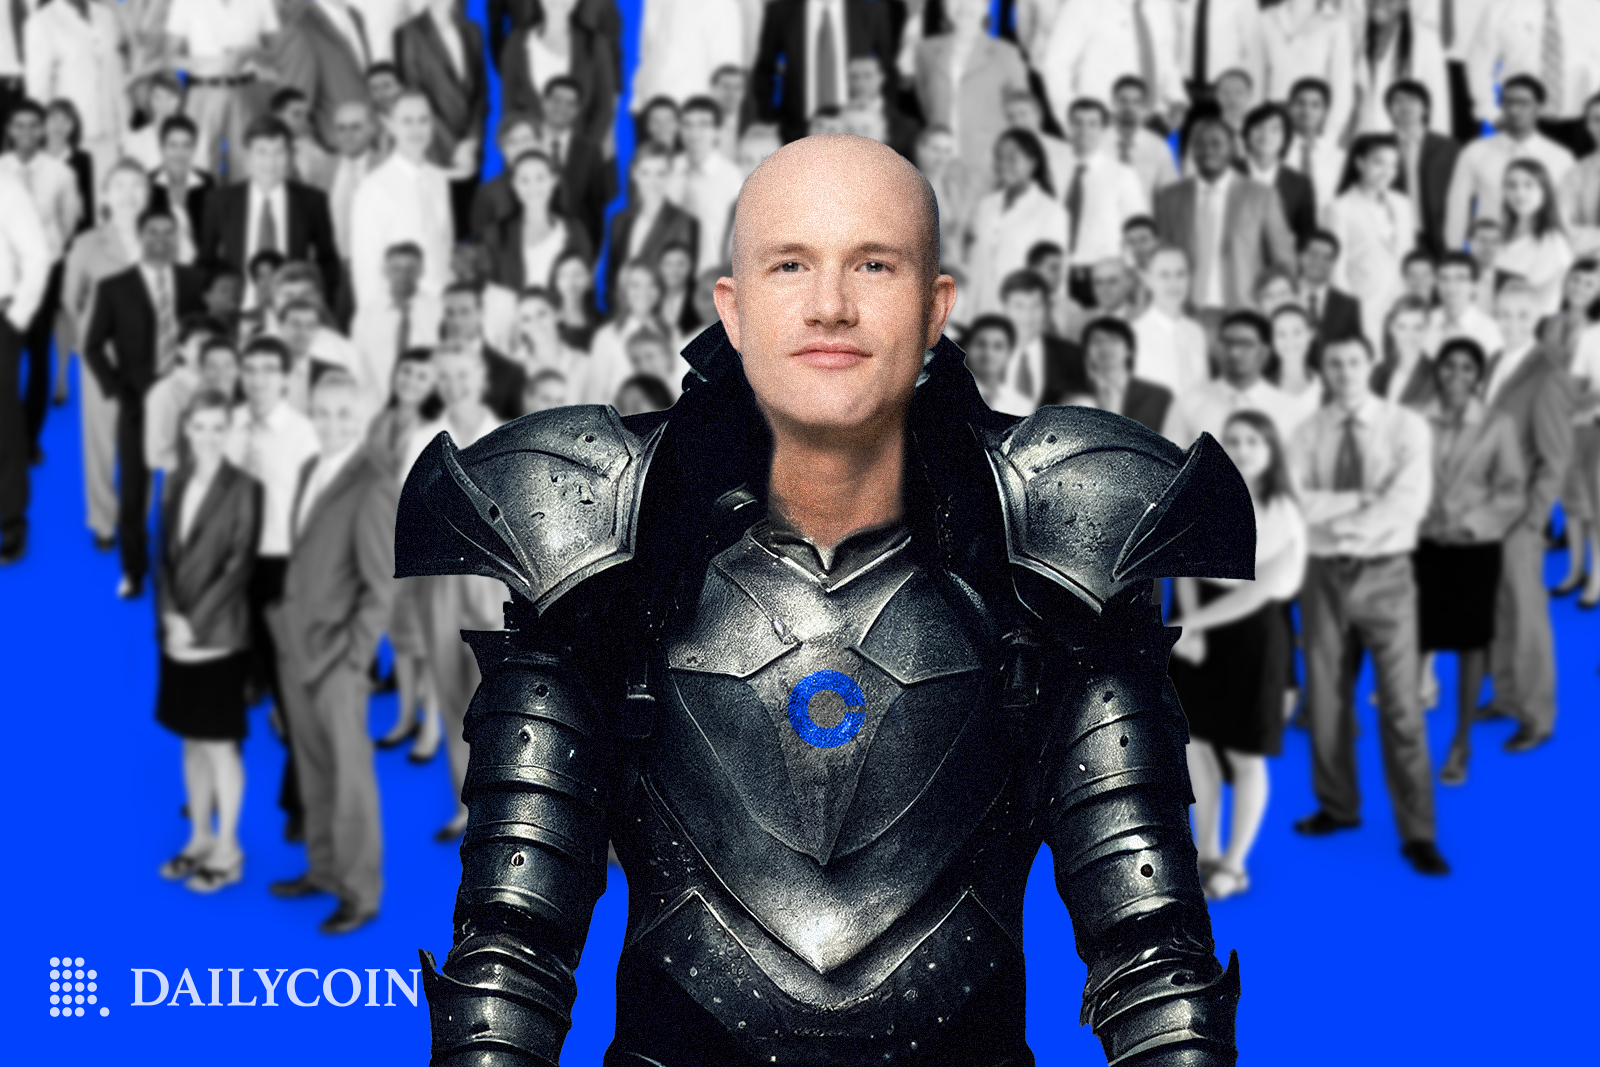 Coinbase CEO Brian Armstrong wearing an armor leading an army of people to fight.